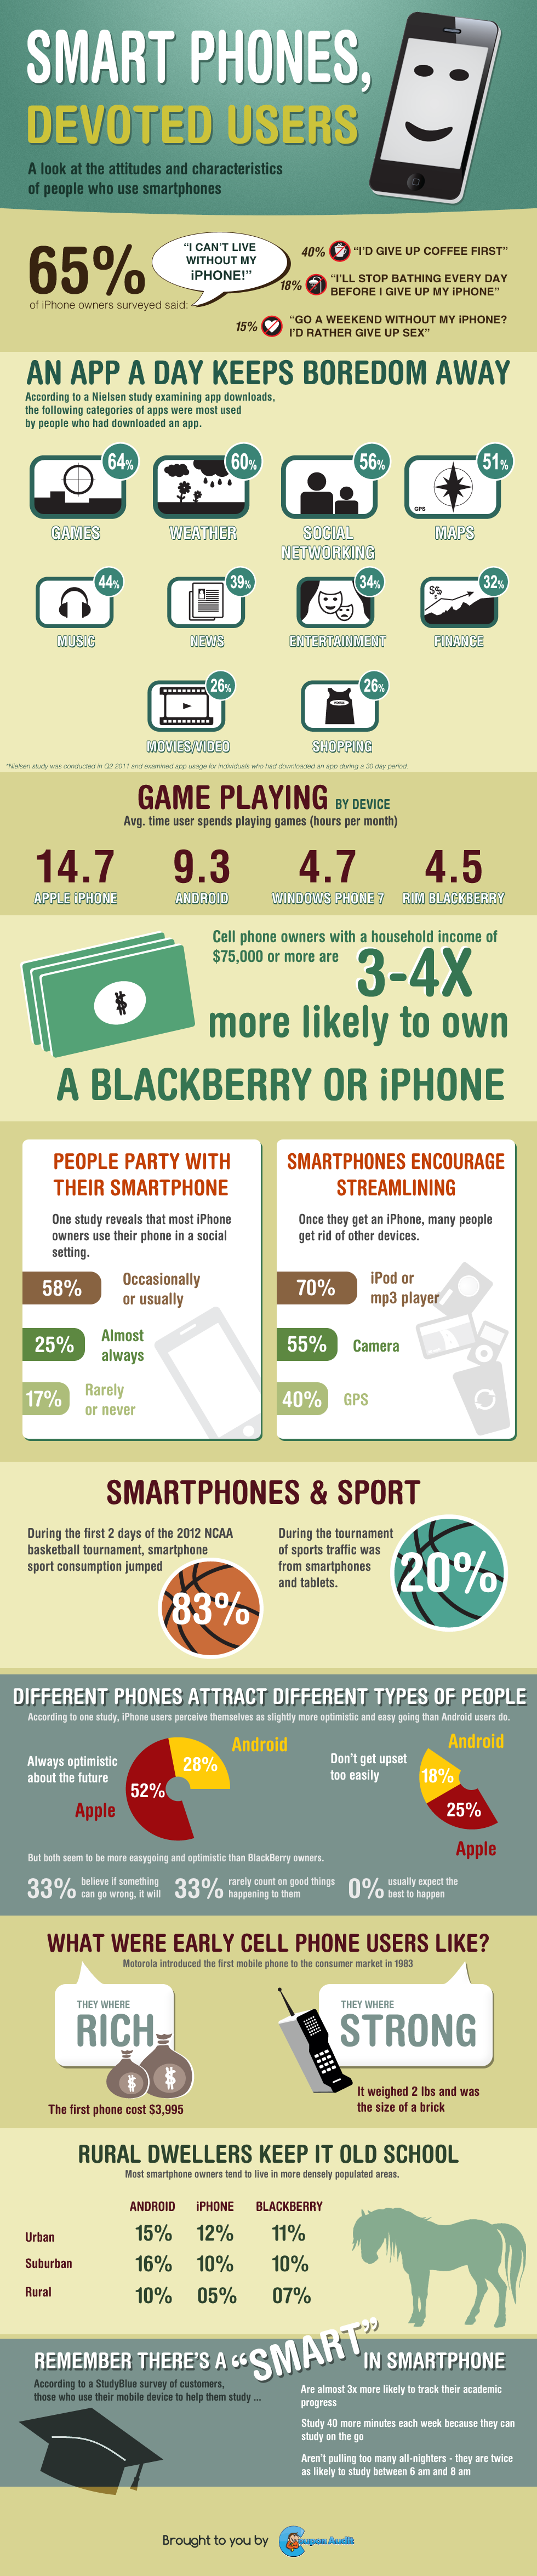 Smartphone Users By The Numbers - Infographic